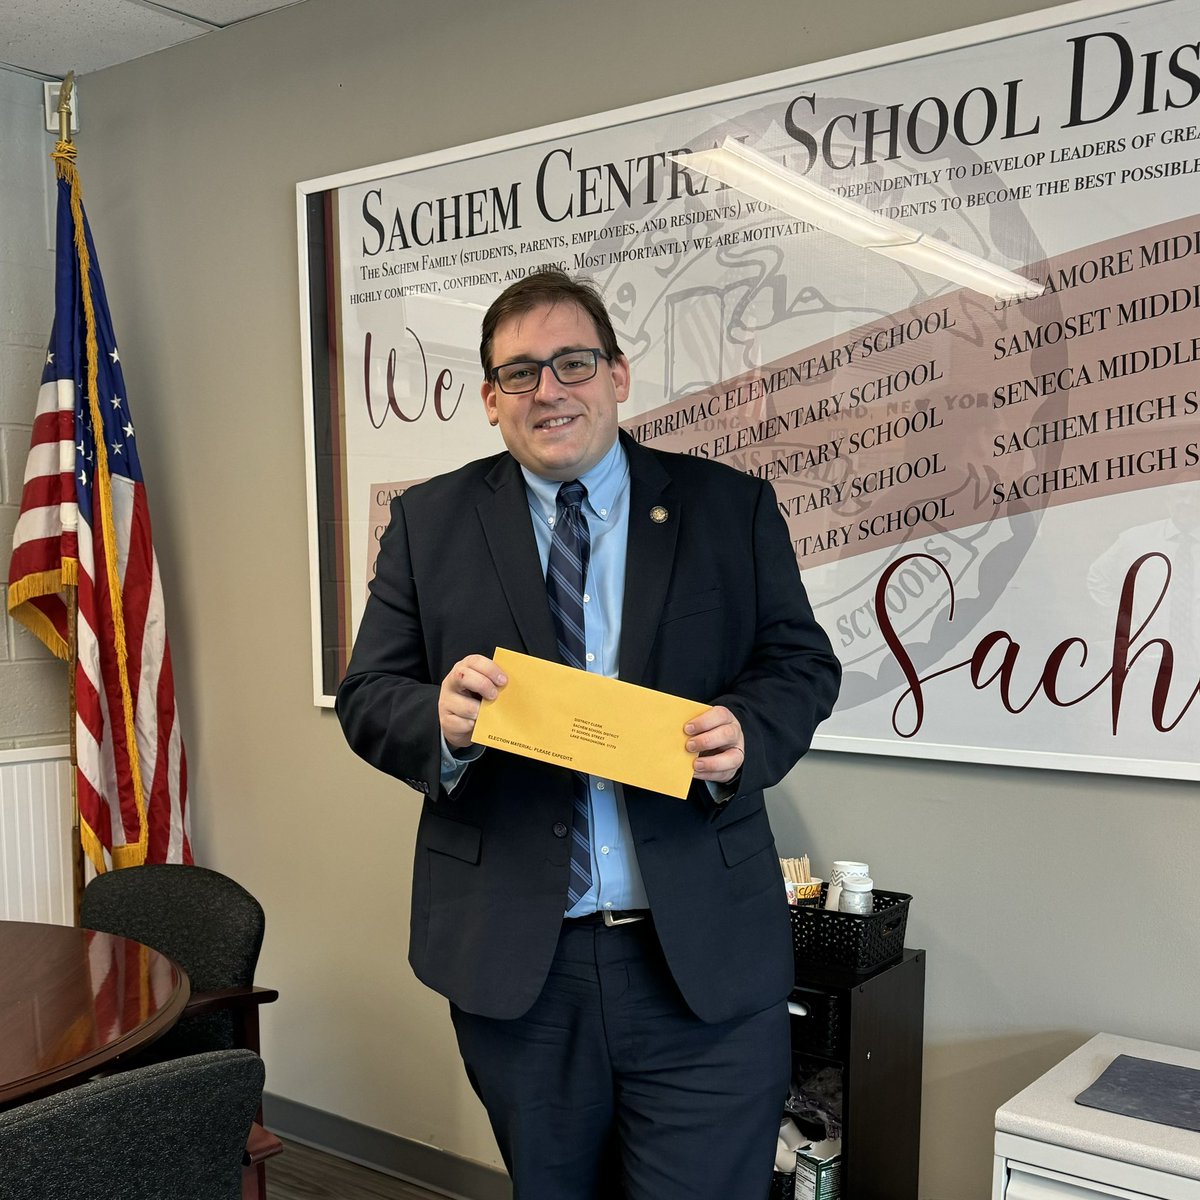 🎓🗳️ Don’t forget to vote in Tuesday’s School Budget! Just voted absentee as I’ll be in Albany. As a proud Sachem graduate, parent, and taxpayer: I can tell you this is the election where your vote has the most weight & most directly impacts our community and property values.